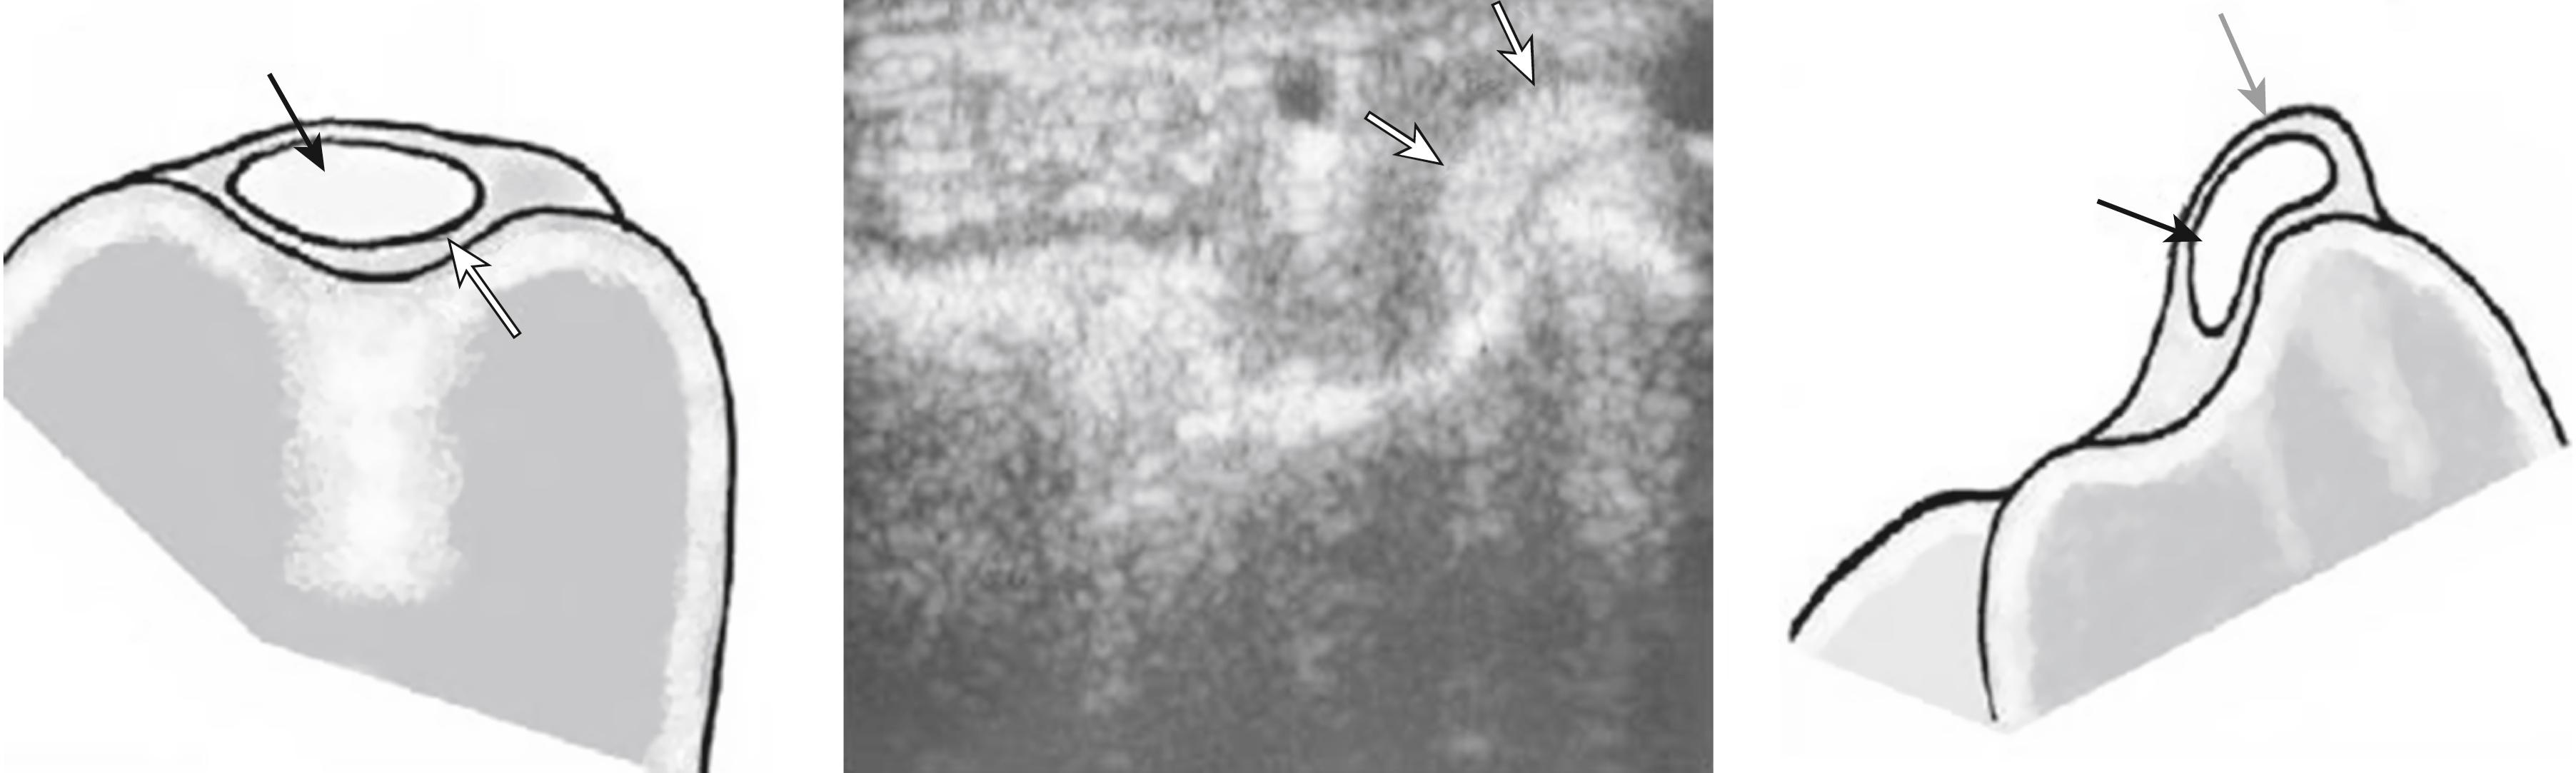 eFig. 14.2, Dynamic ultrasound of the wrist. With the wrist in supination, the extensor carpi ulnaris (ECU) tendon (arrows) subluxates out of the distal ulnar groove in an ulnar and volar direction. Illustration of ultrasound image: The ECU tendon (black arrow) subluxates out of the groove but remains within the sheath (gray arrow) .